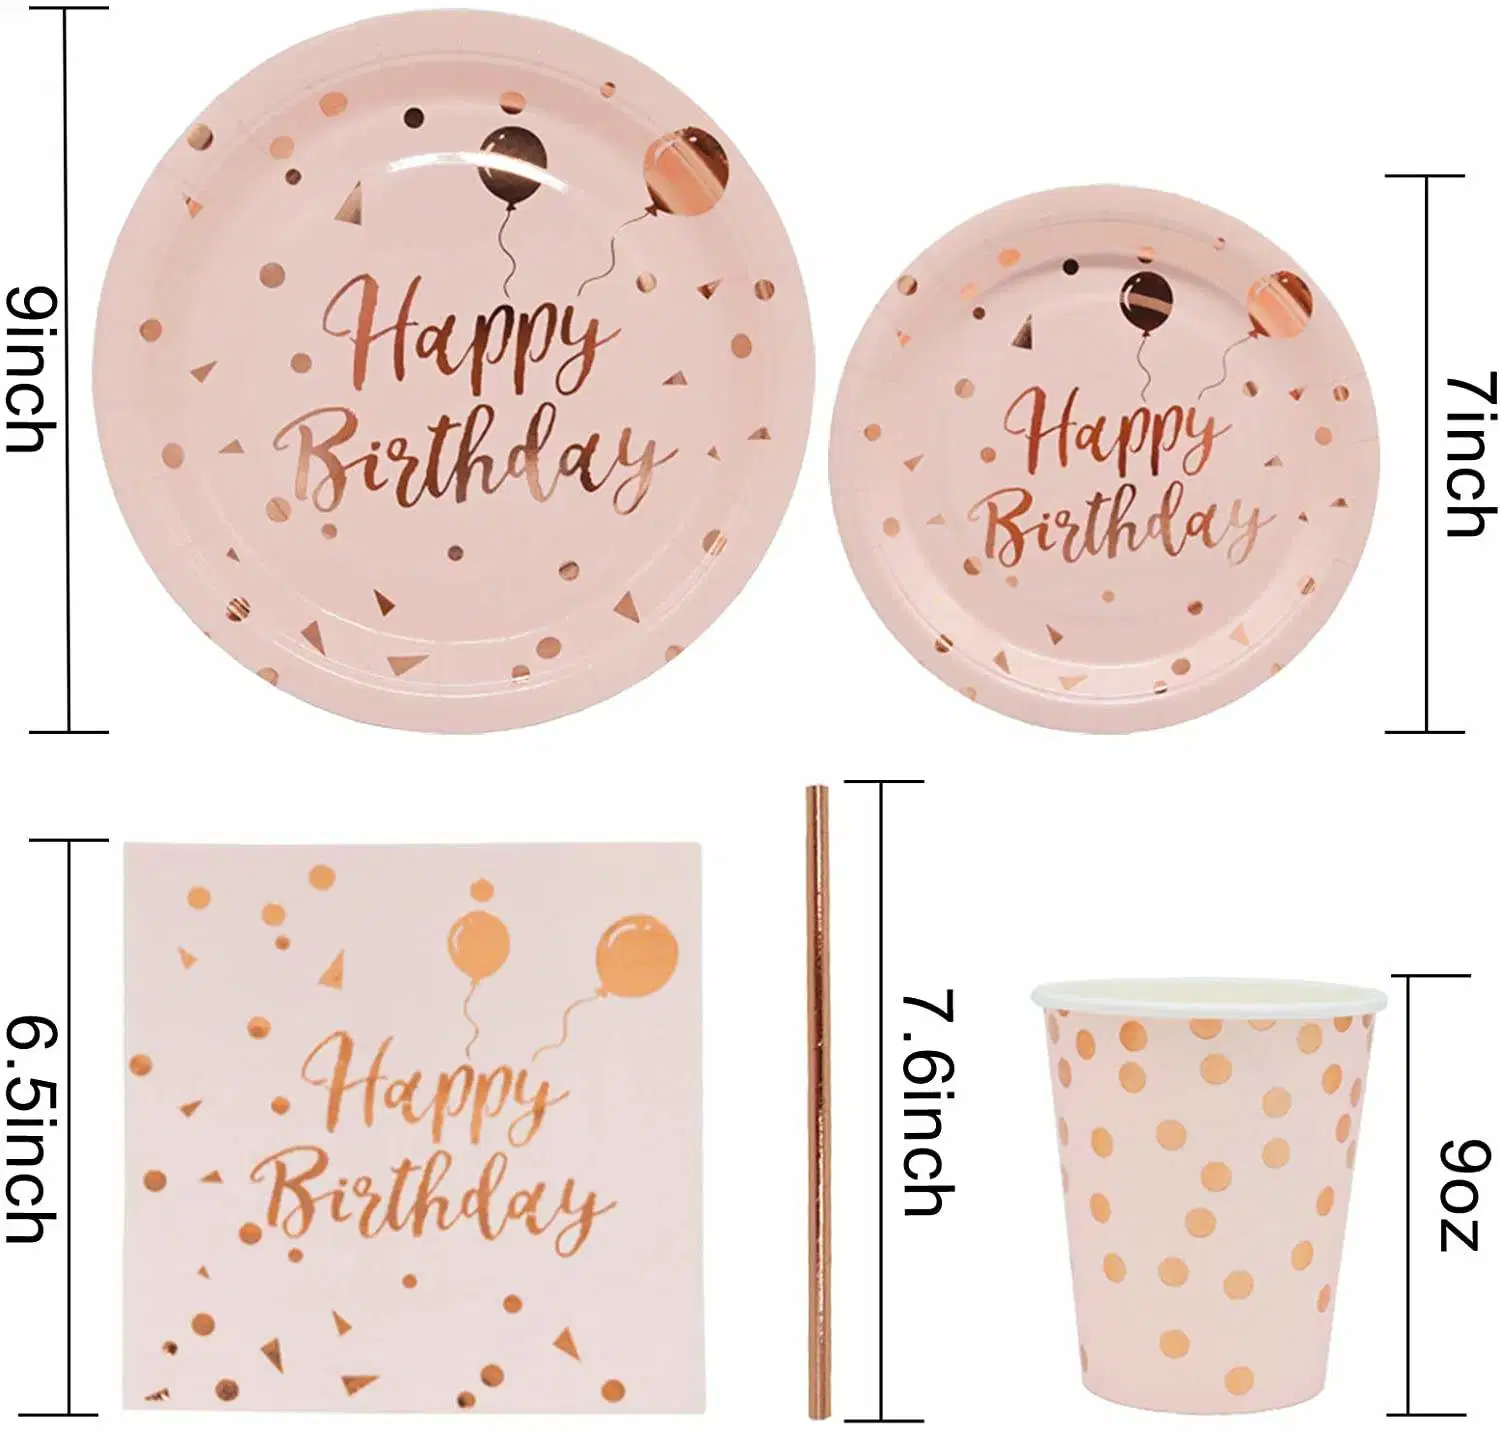 25 Pink Birthday Party Plates Supplies Rose Gold Paper Plates Cups Napkins Sets Plastic Silverware for Rose Gold Birthday Party